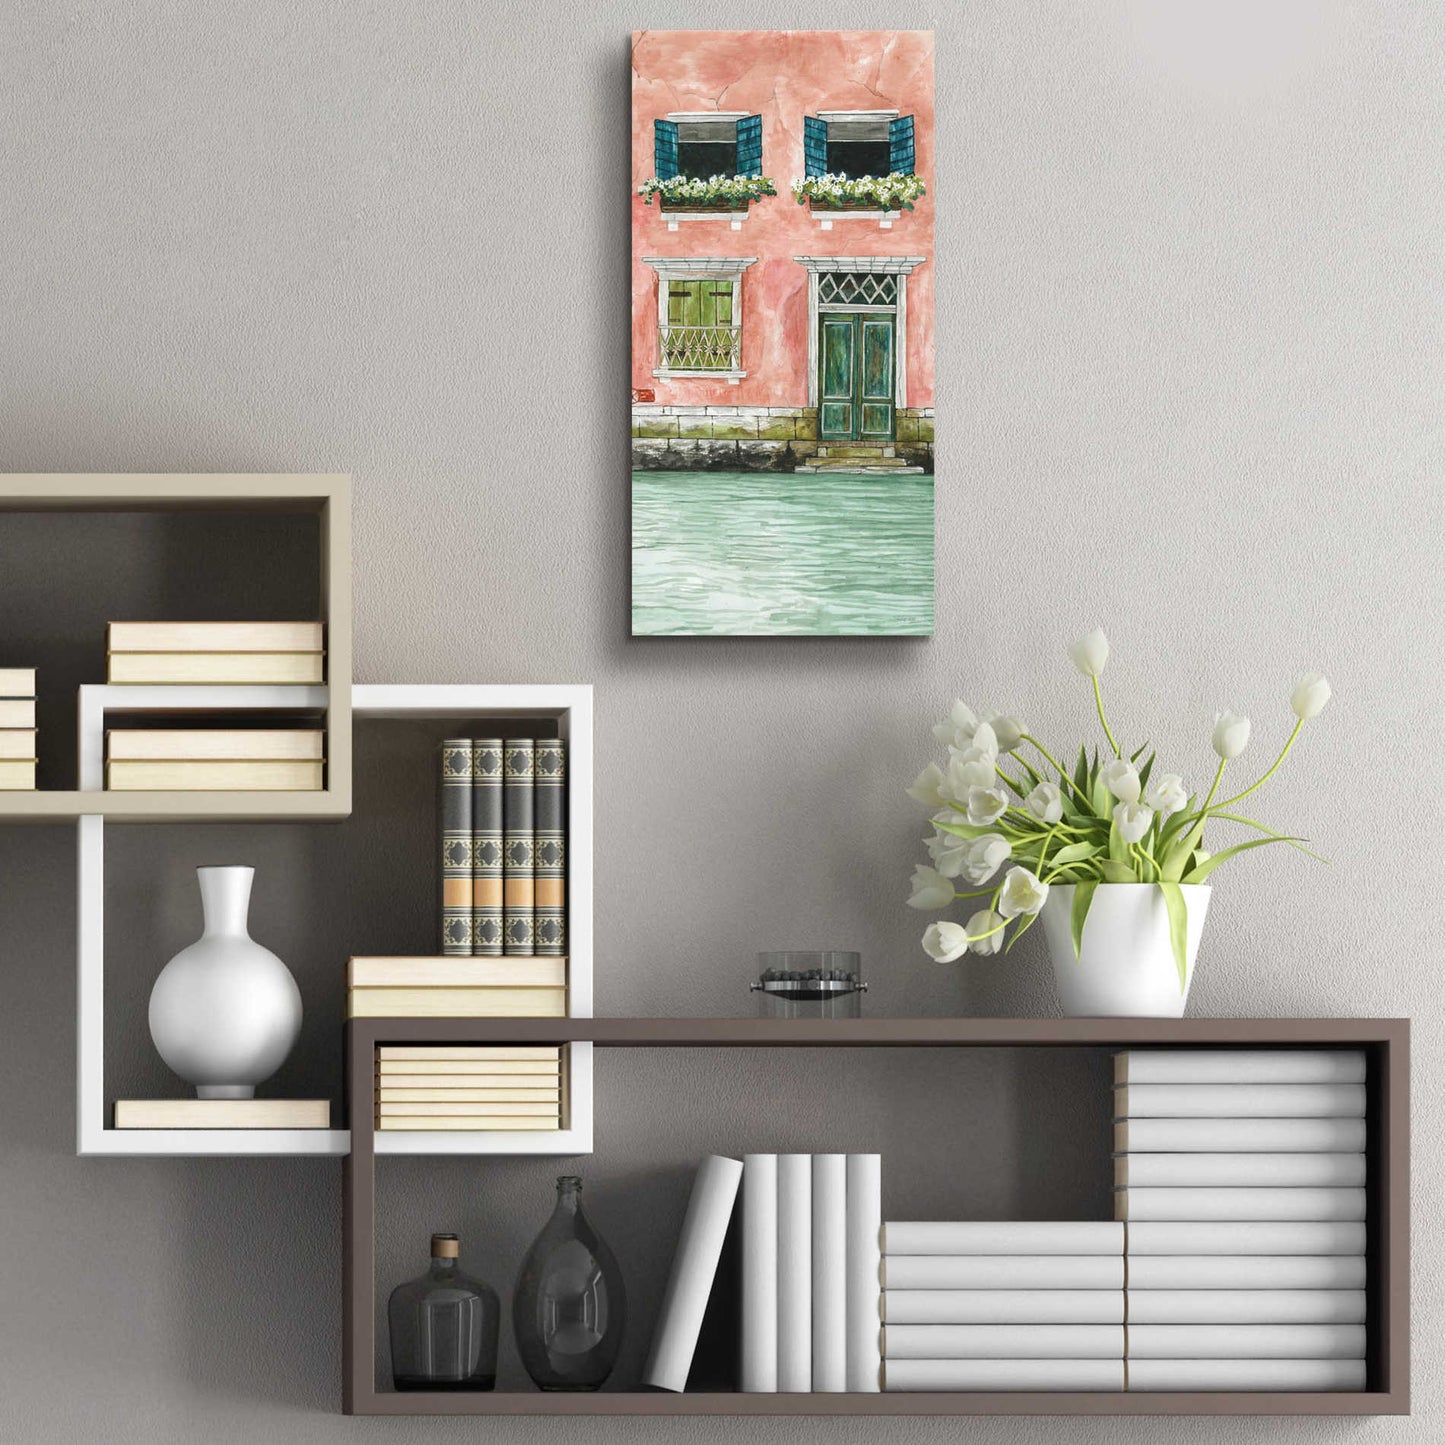 Epic Art 'Grand Canal I' by Cindy Jacobs, Acrylic Glass Wall Art,12x24